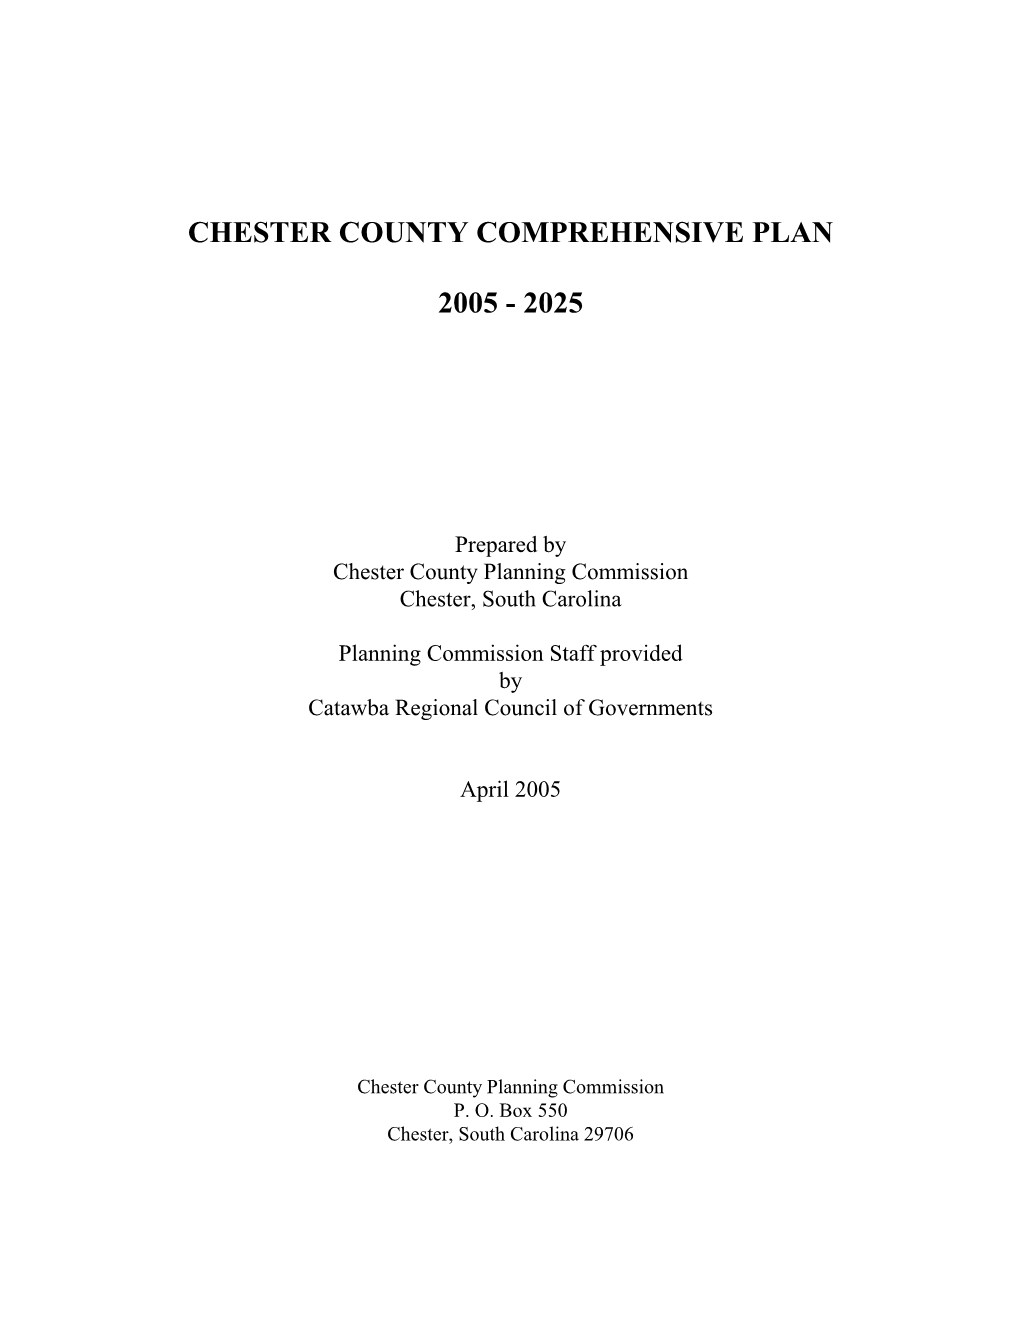 Chester County Comprehensive Plan